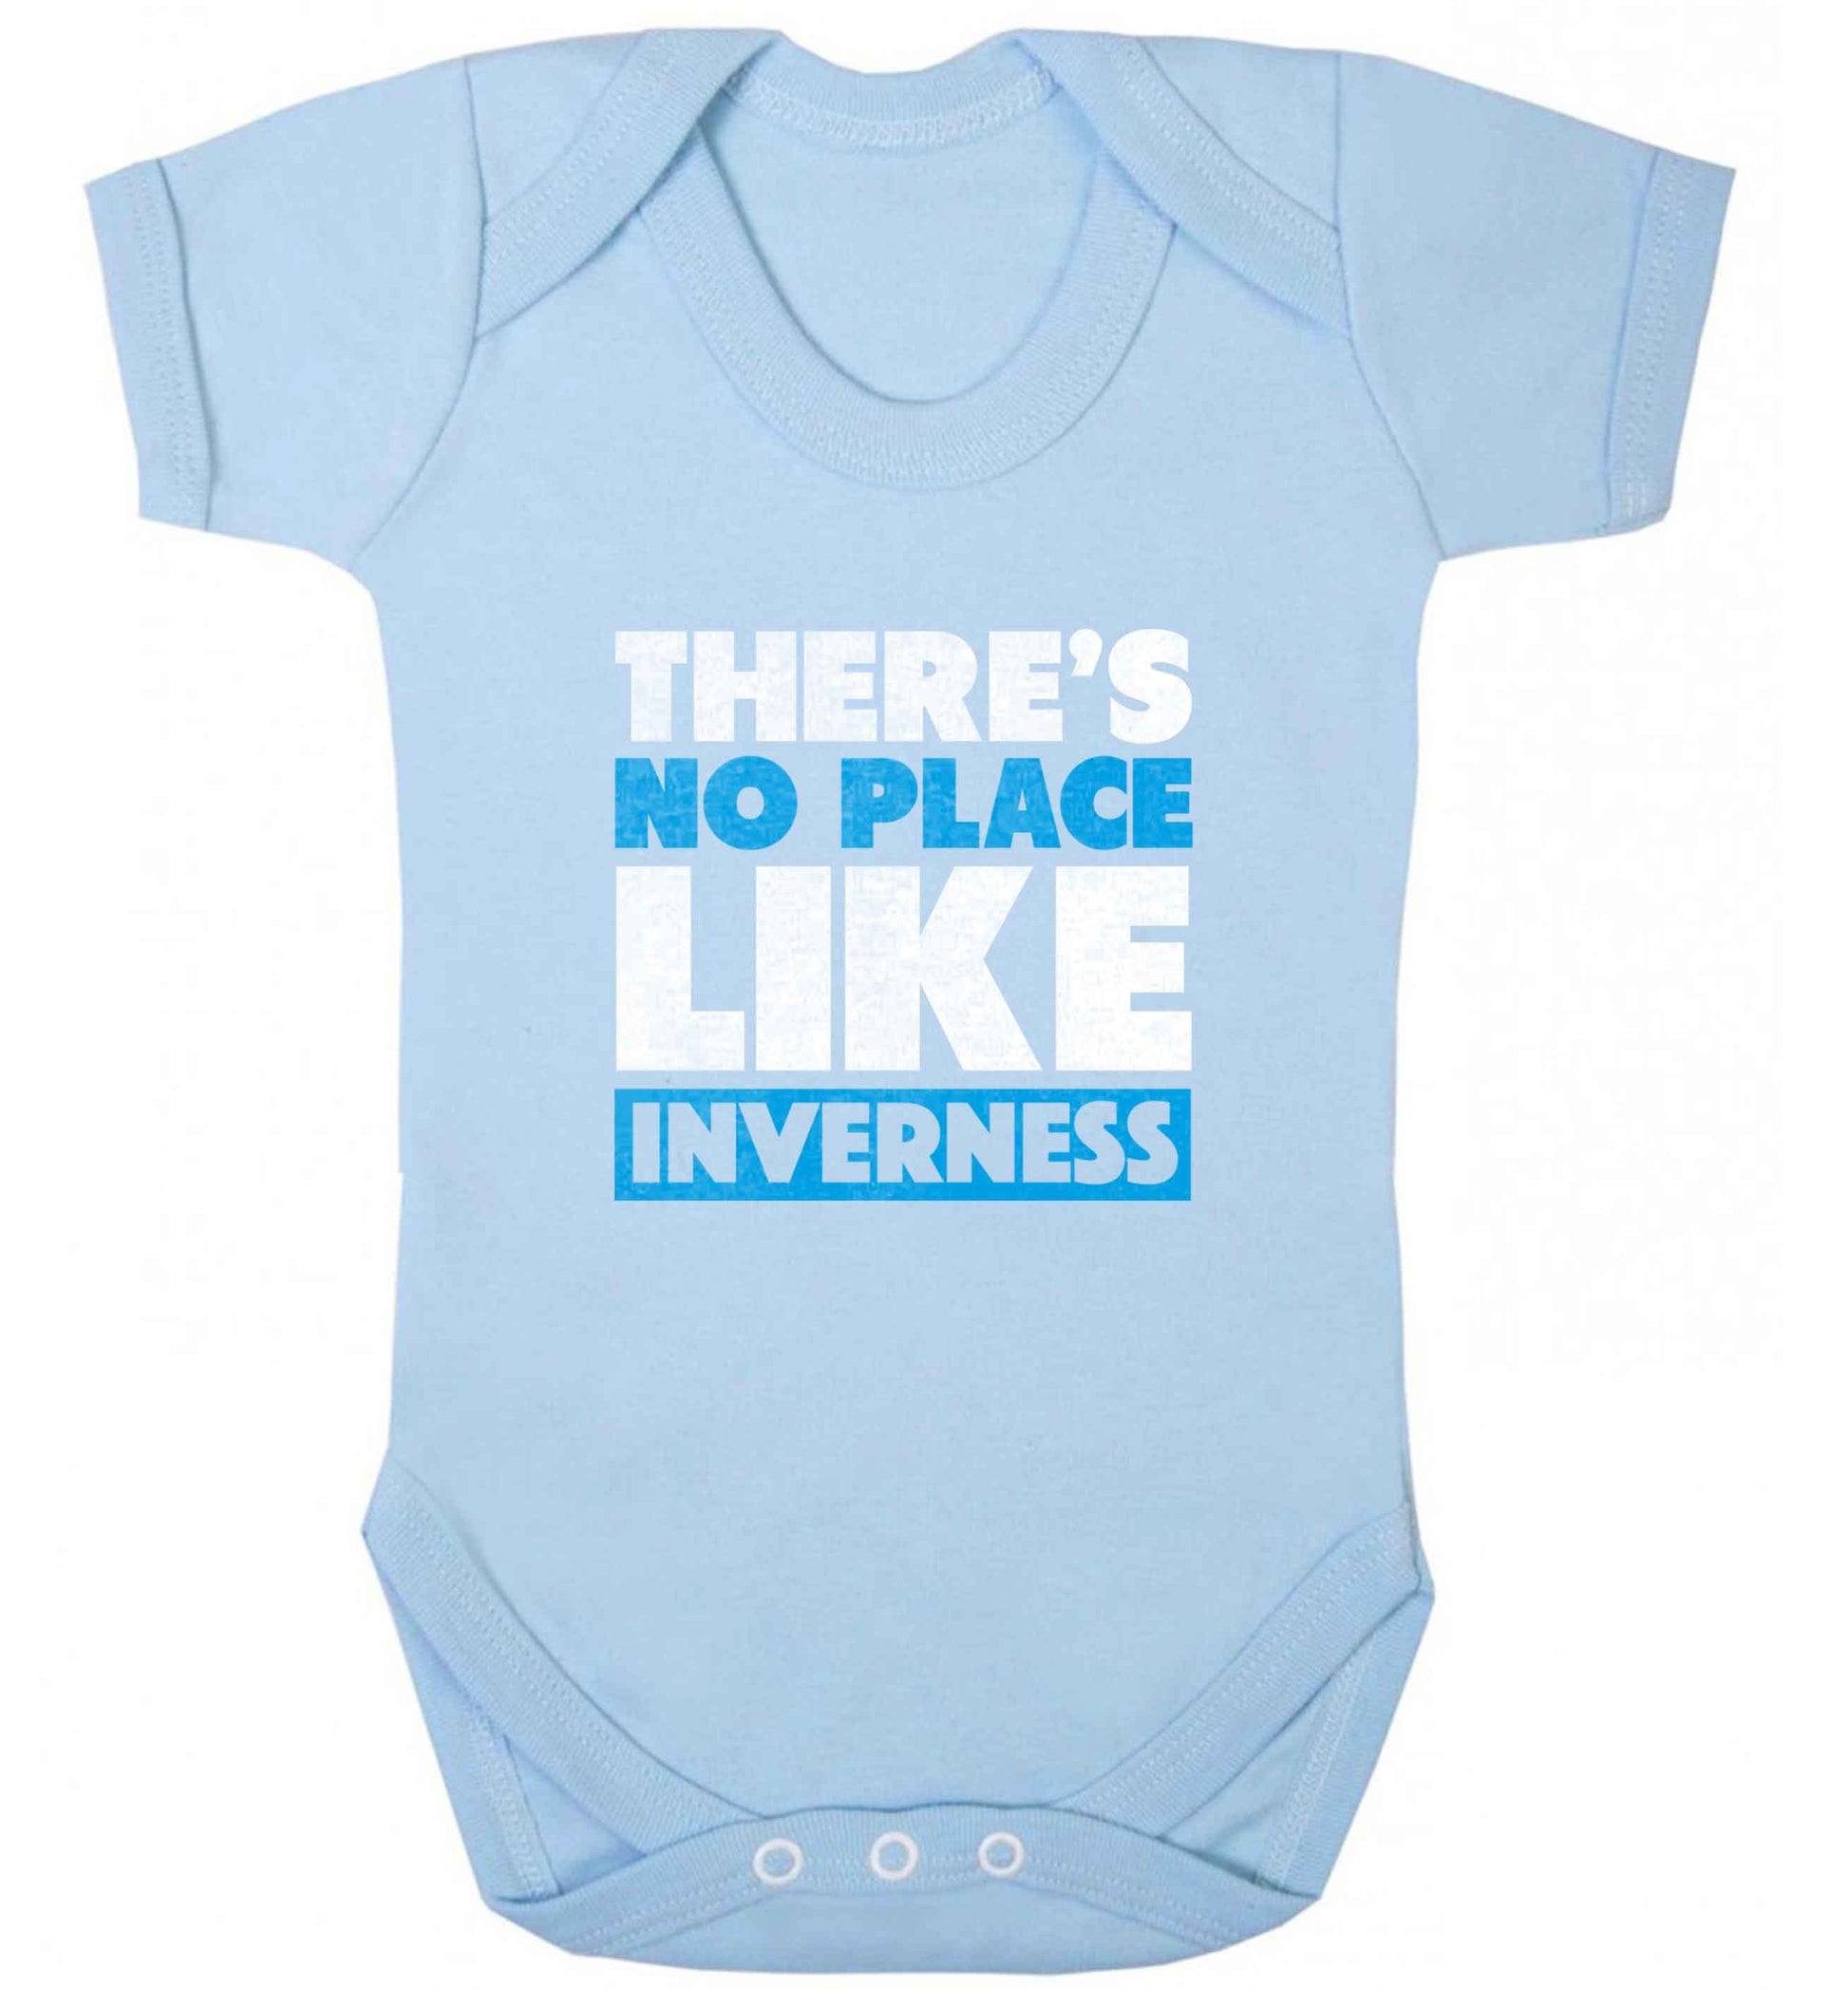 There's no place like Inverness baby vest pale blue 18-24 months